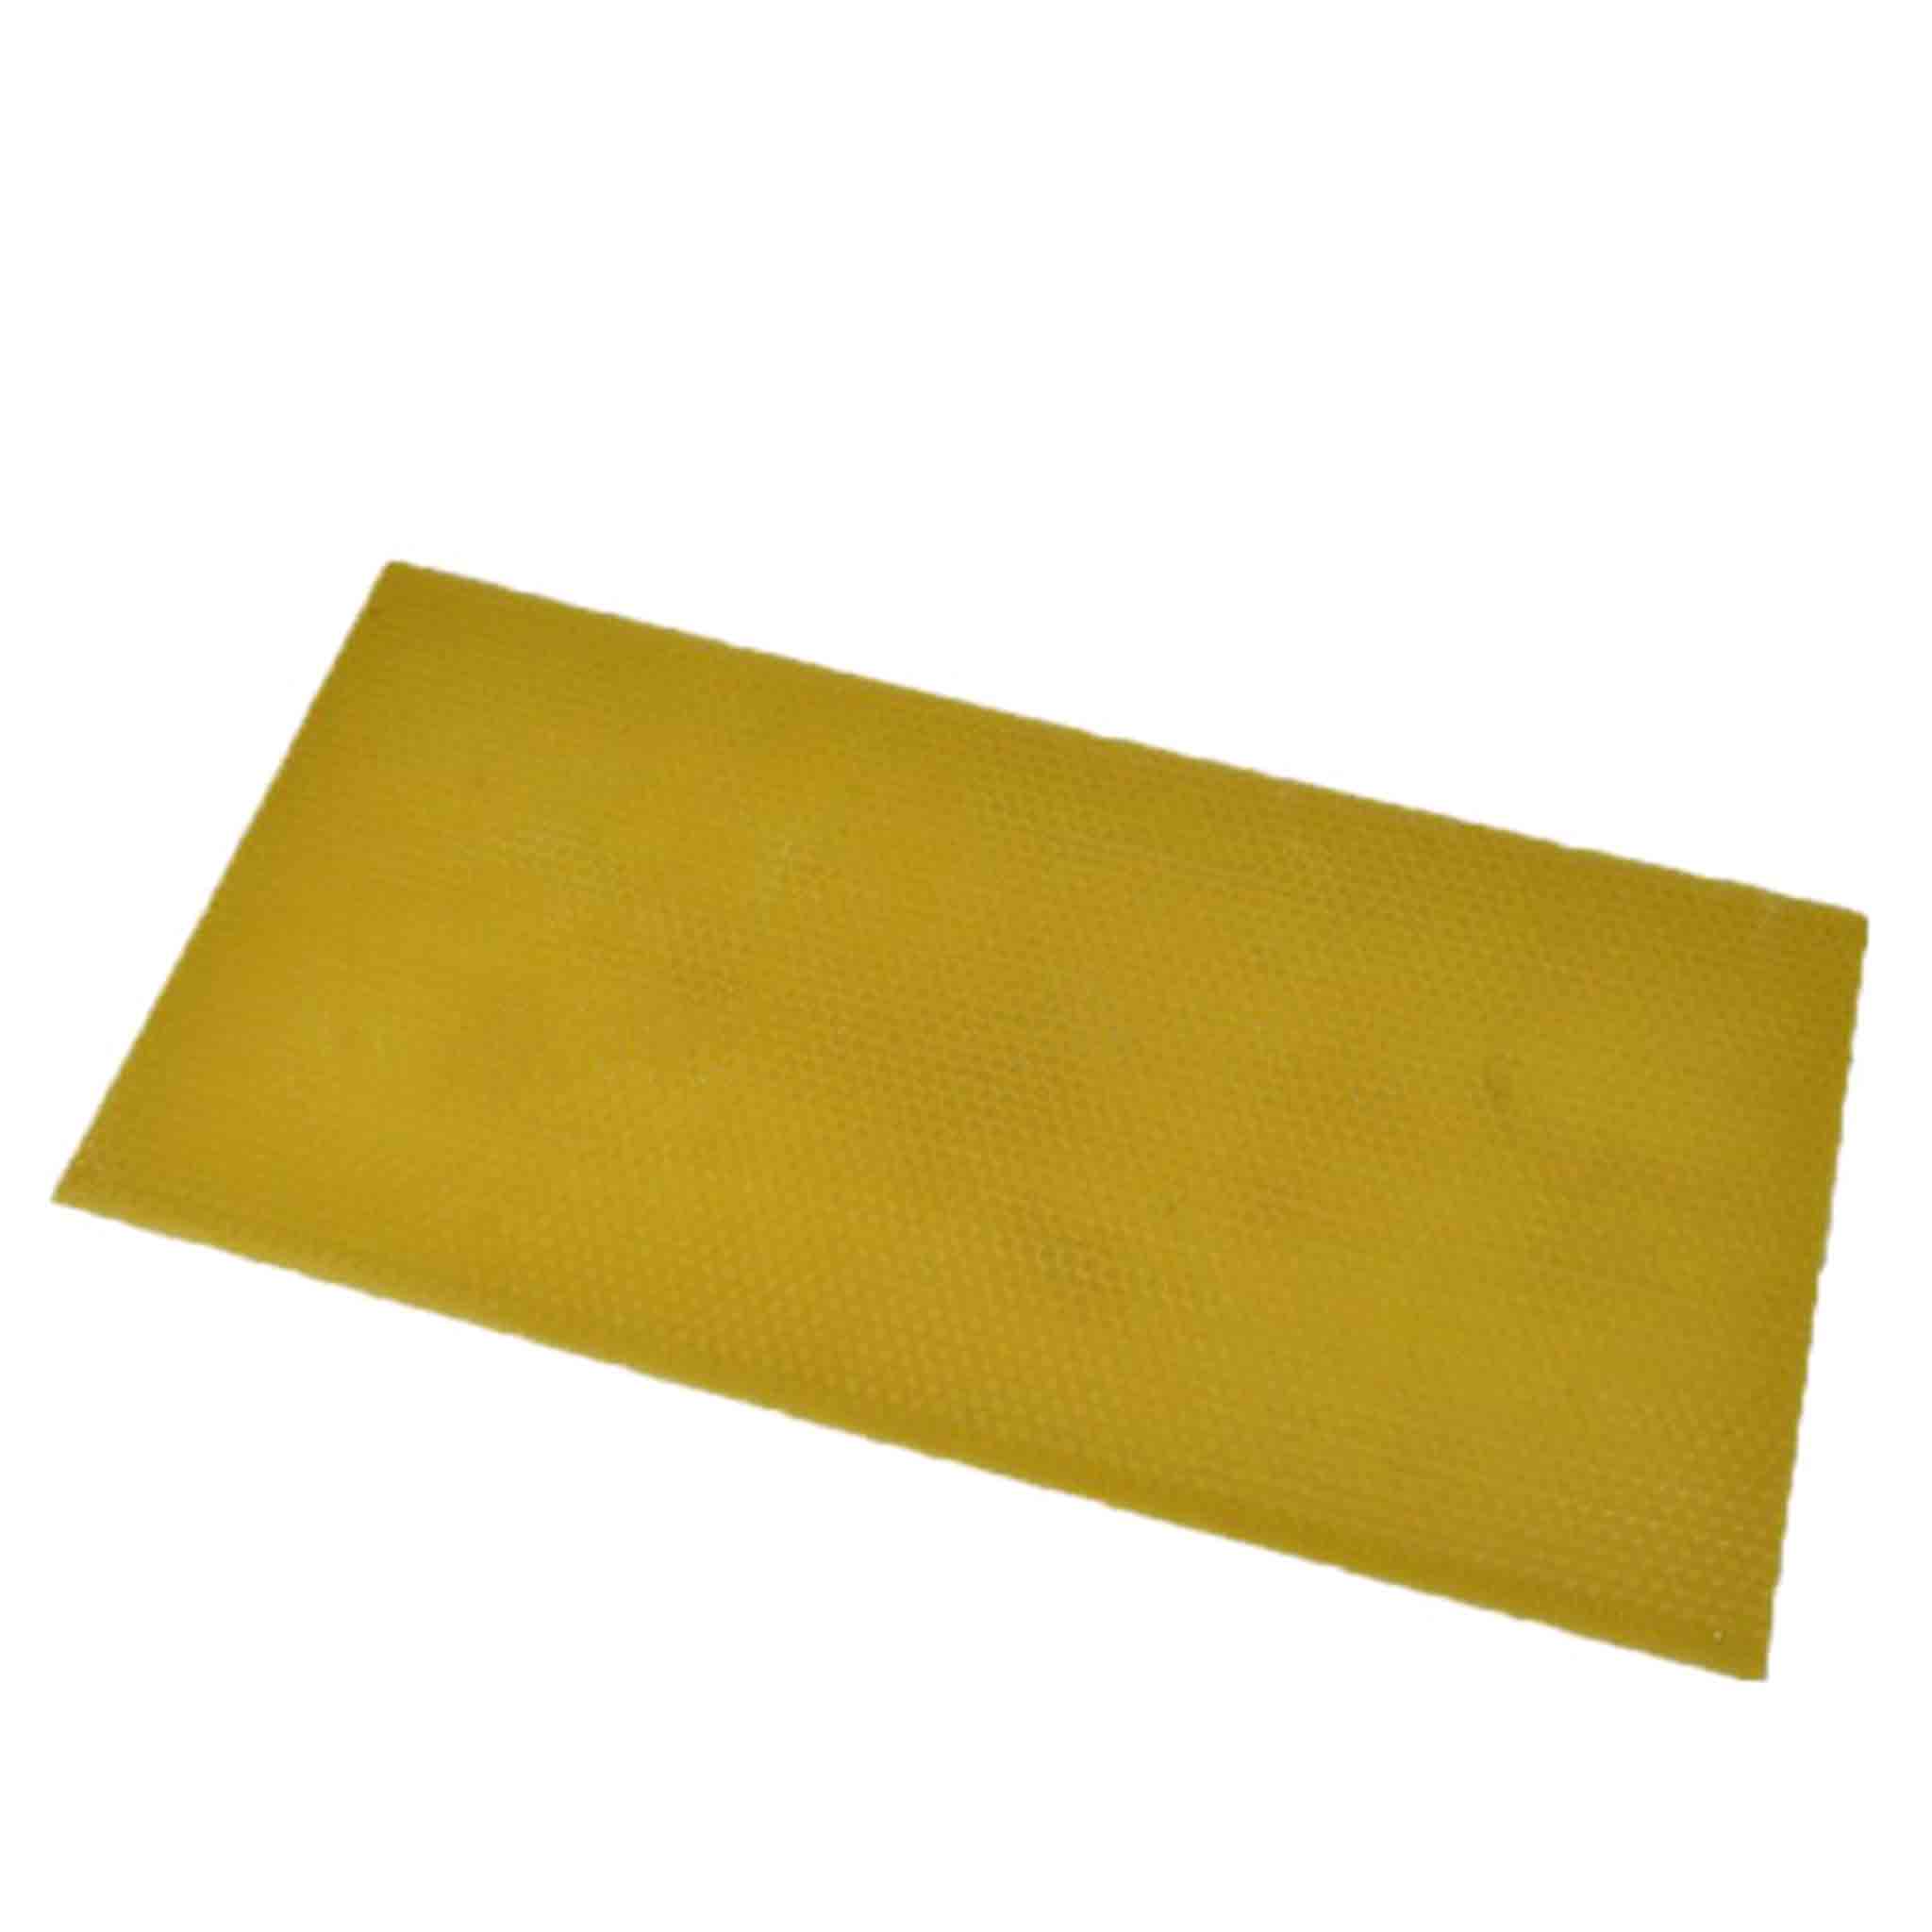 Foundation for langstroth Deep - Plastic - Yellow - Hive Parts collection by Buzzbee Beekeeping Supplies